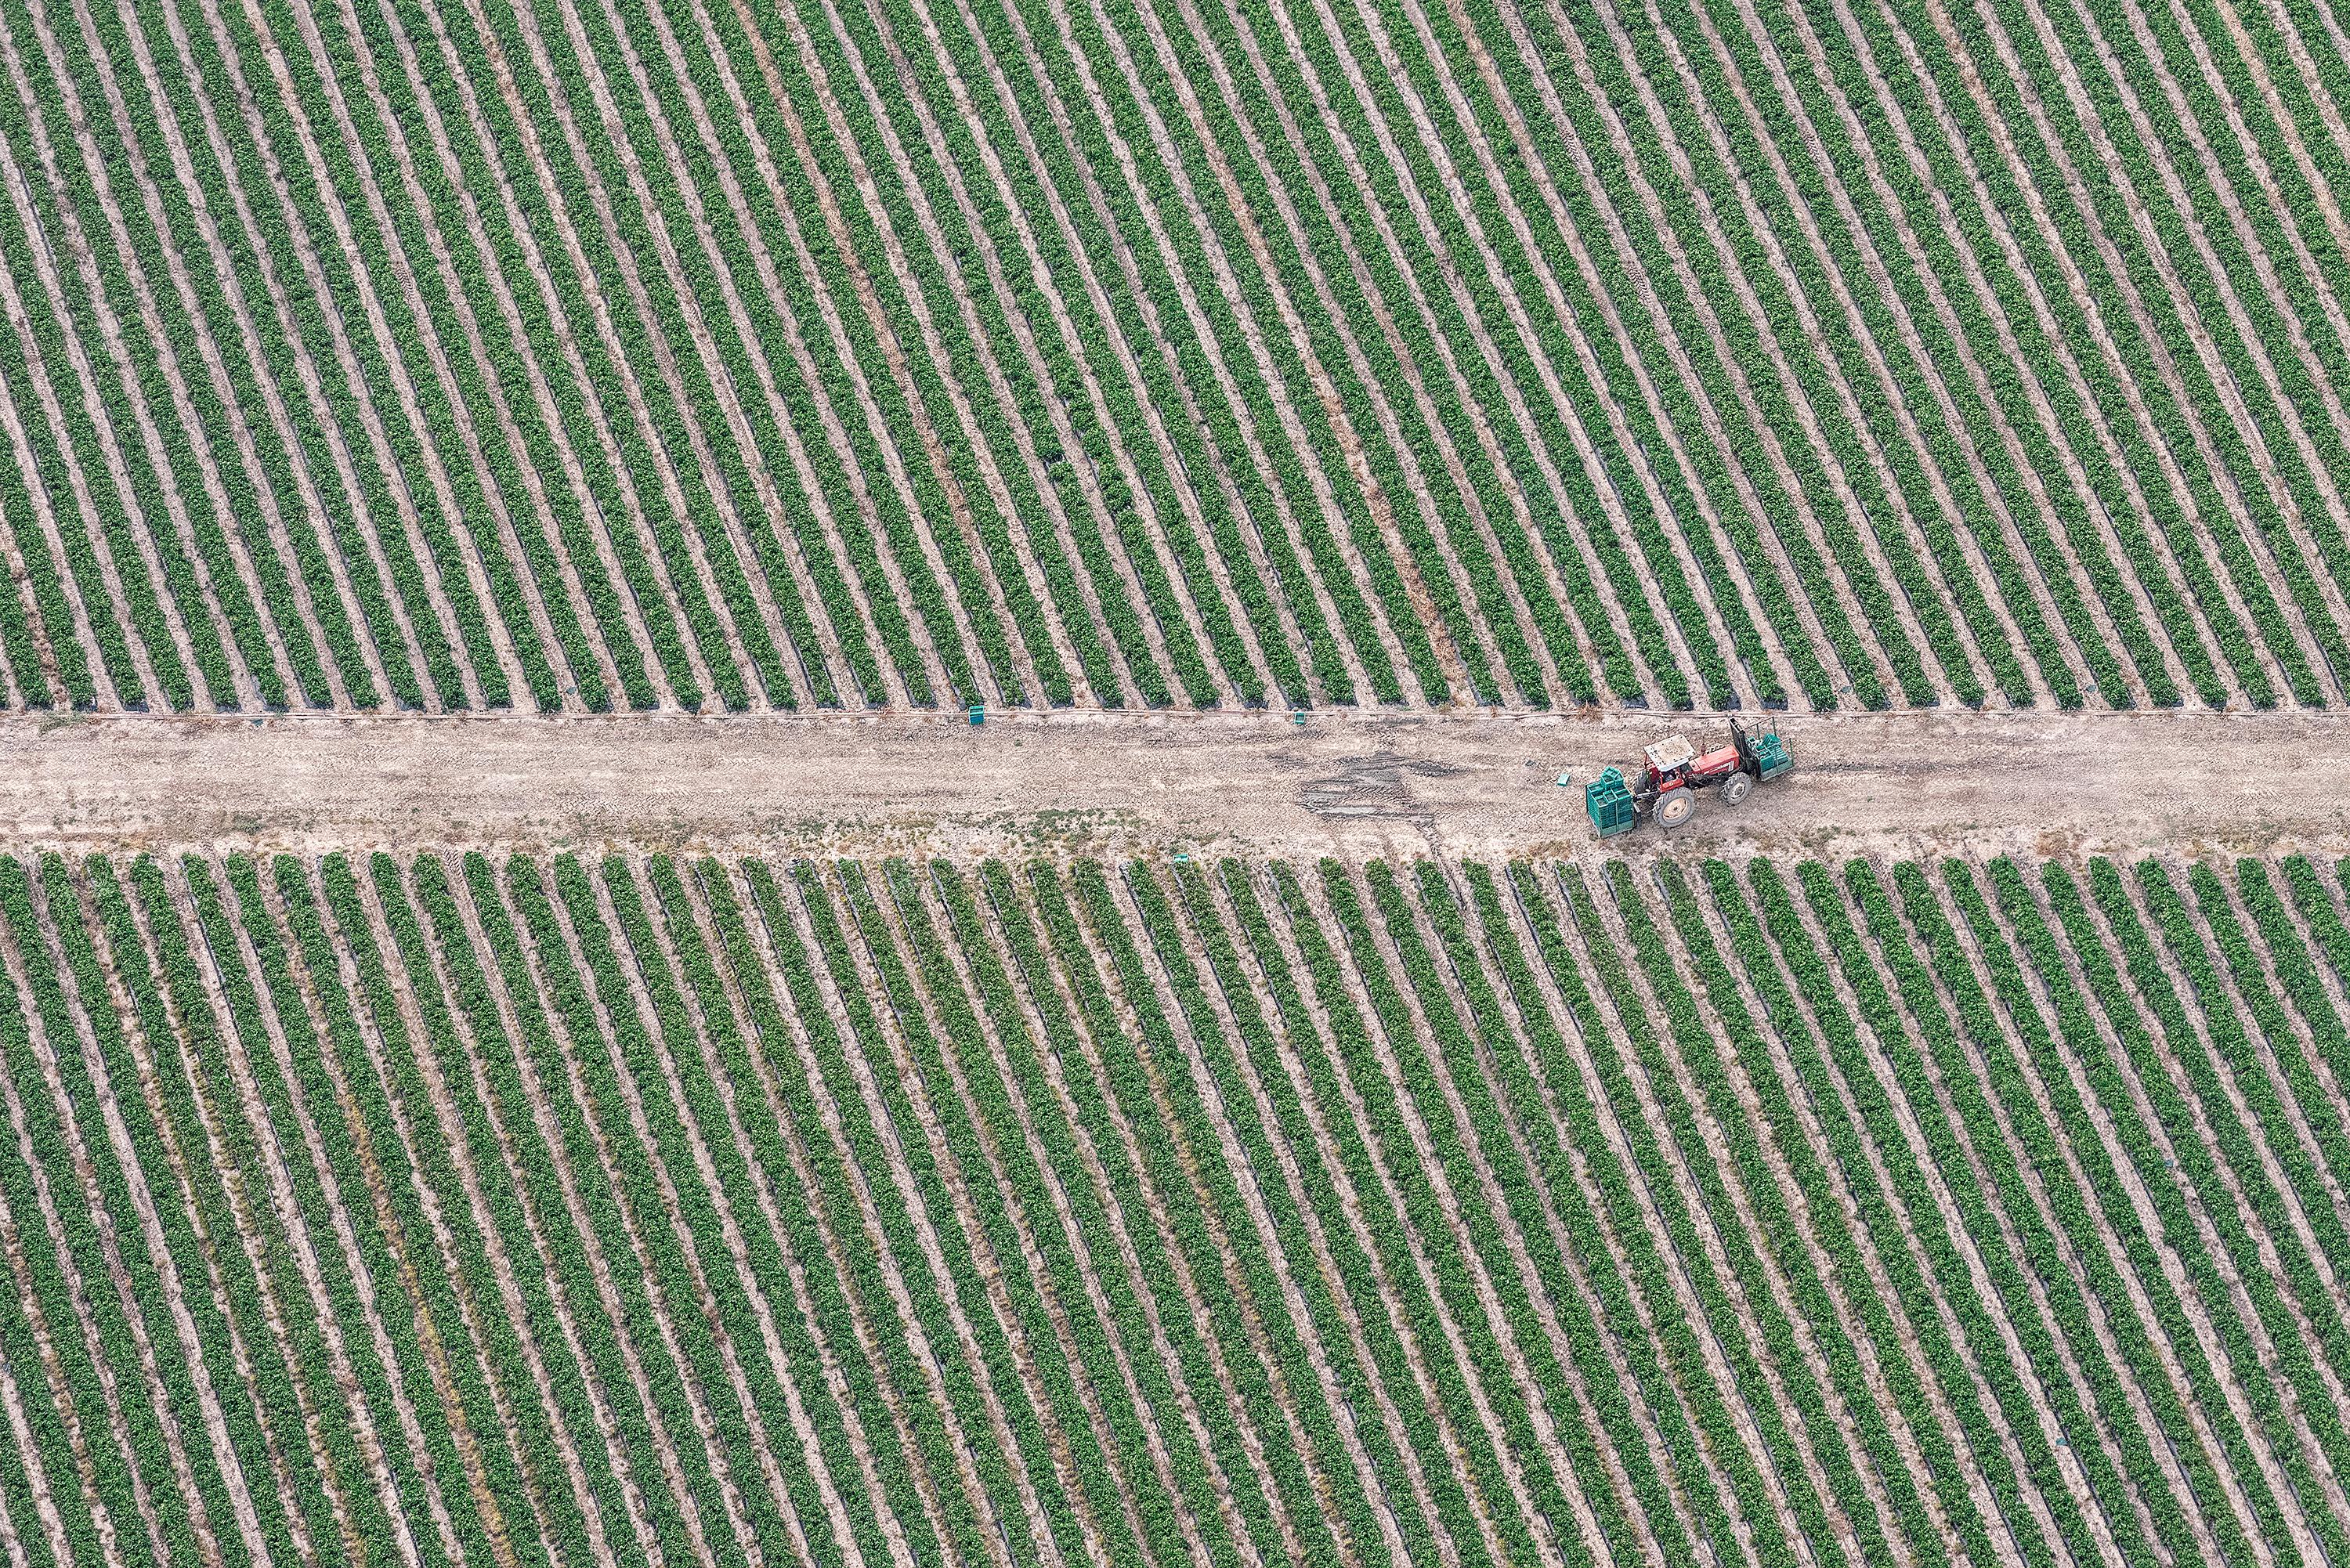 Zoe Wetherall Abstract Photograph - "Tractor" Minimalist Contemporary Color Photograph (green and earth-tone aerial)